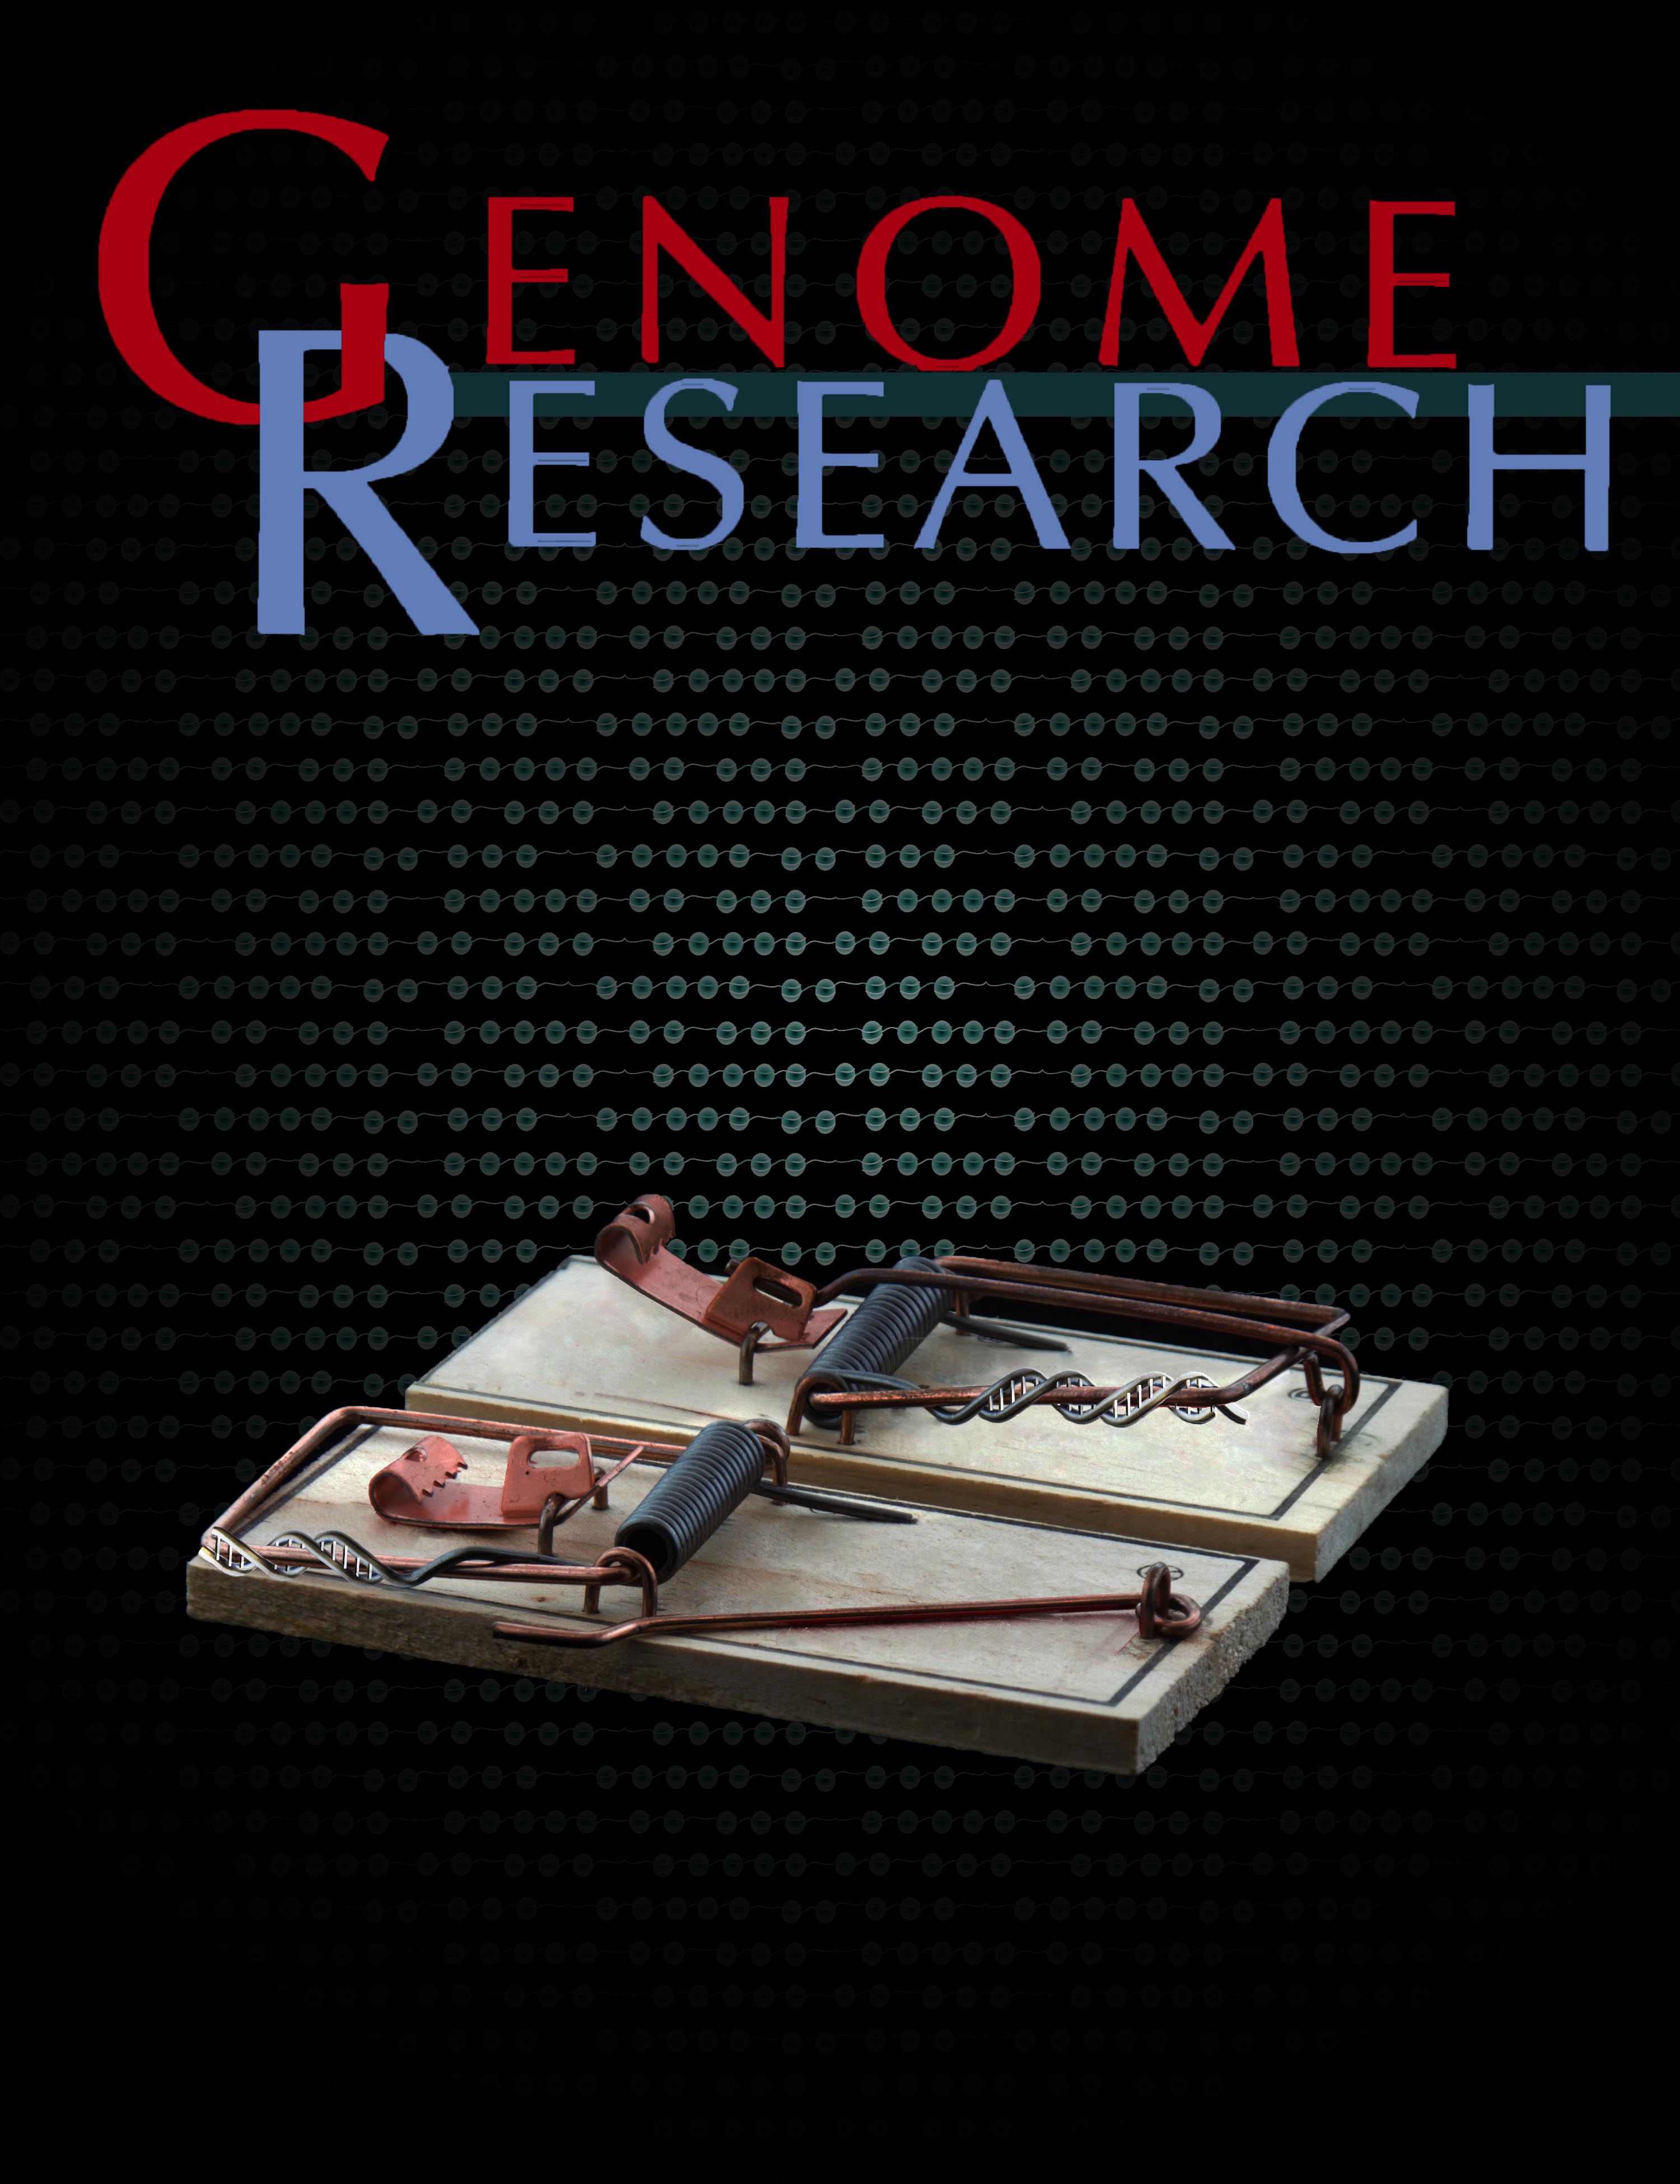 Genome research cover proposal